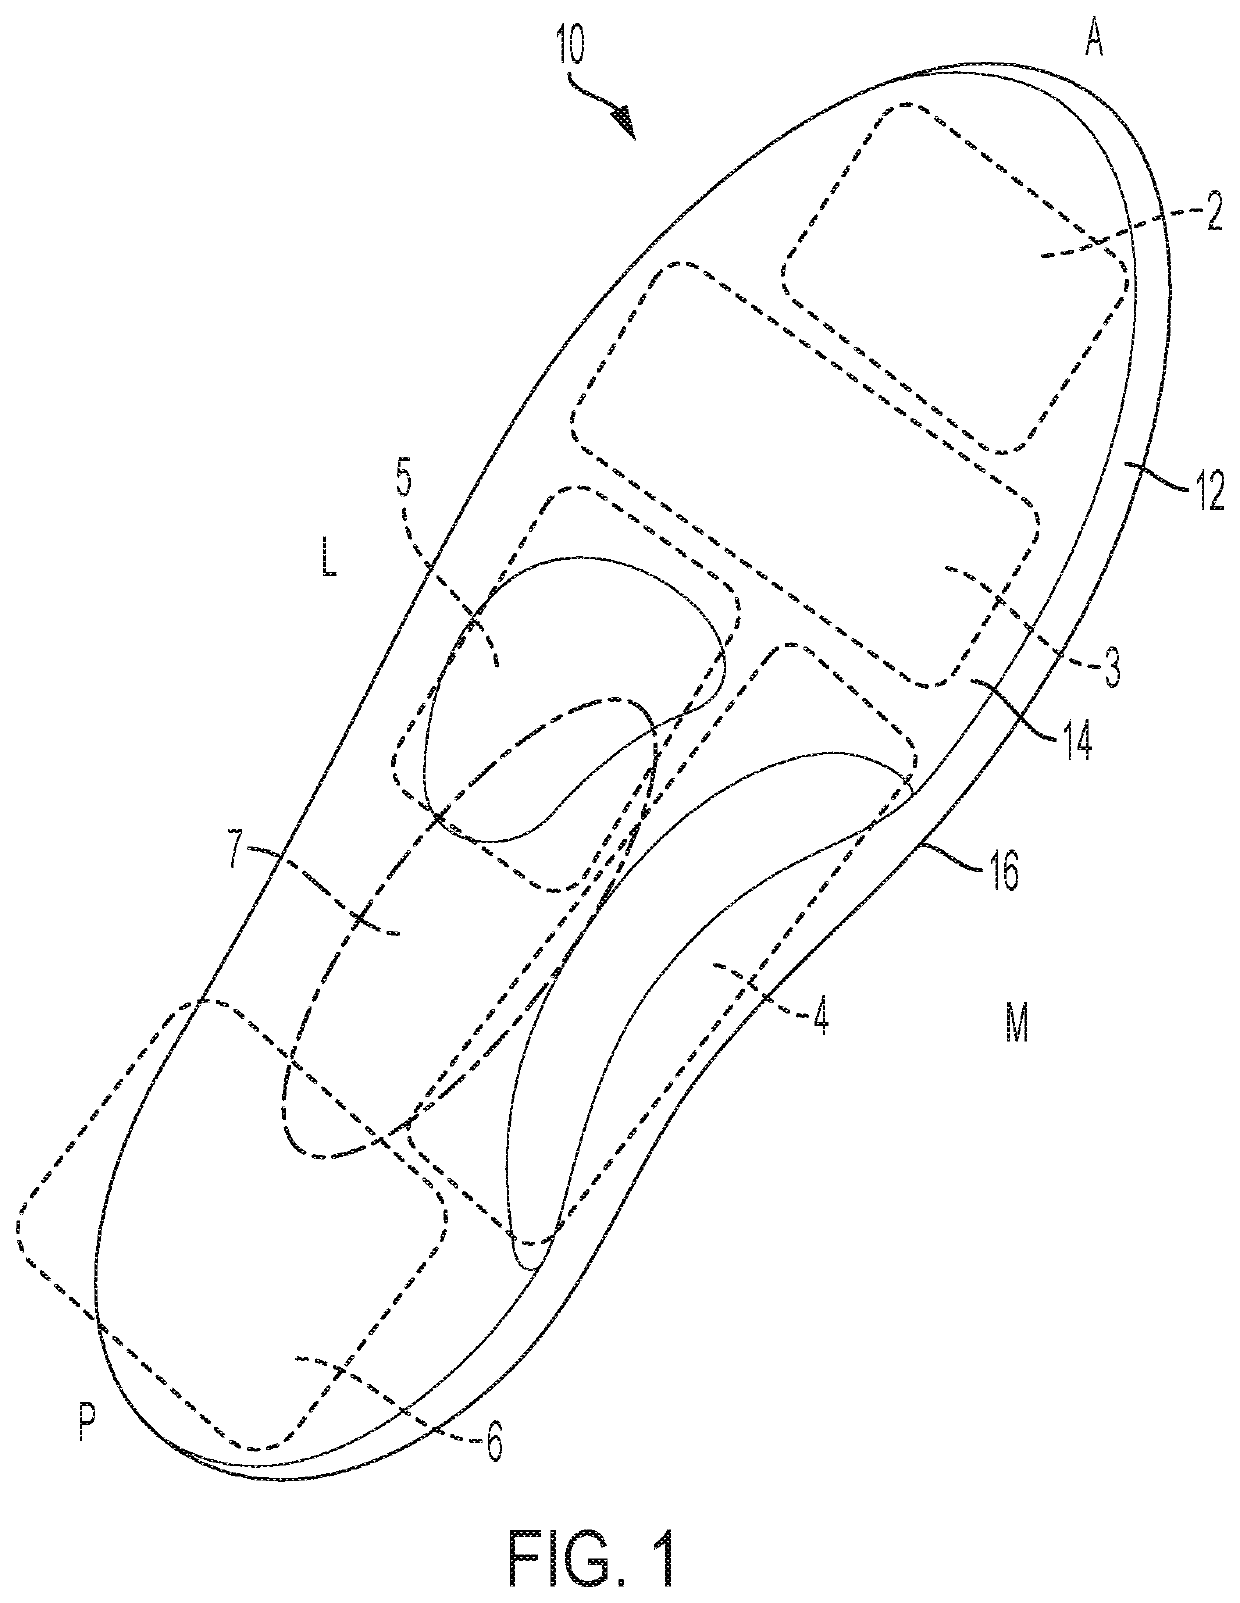 Adaptive Insole for Rehabilitation of Foot Injuries